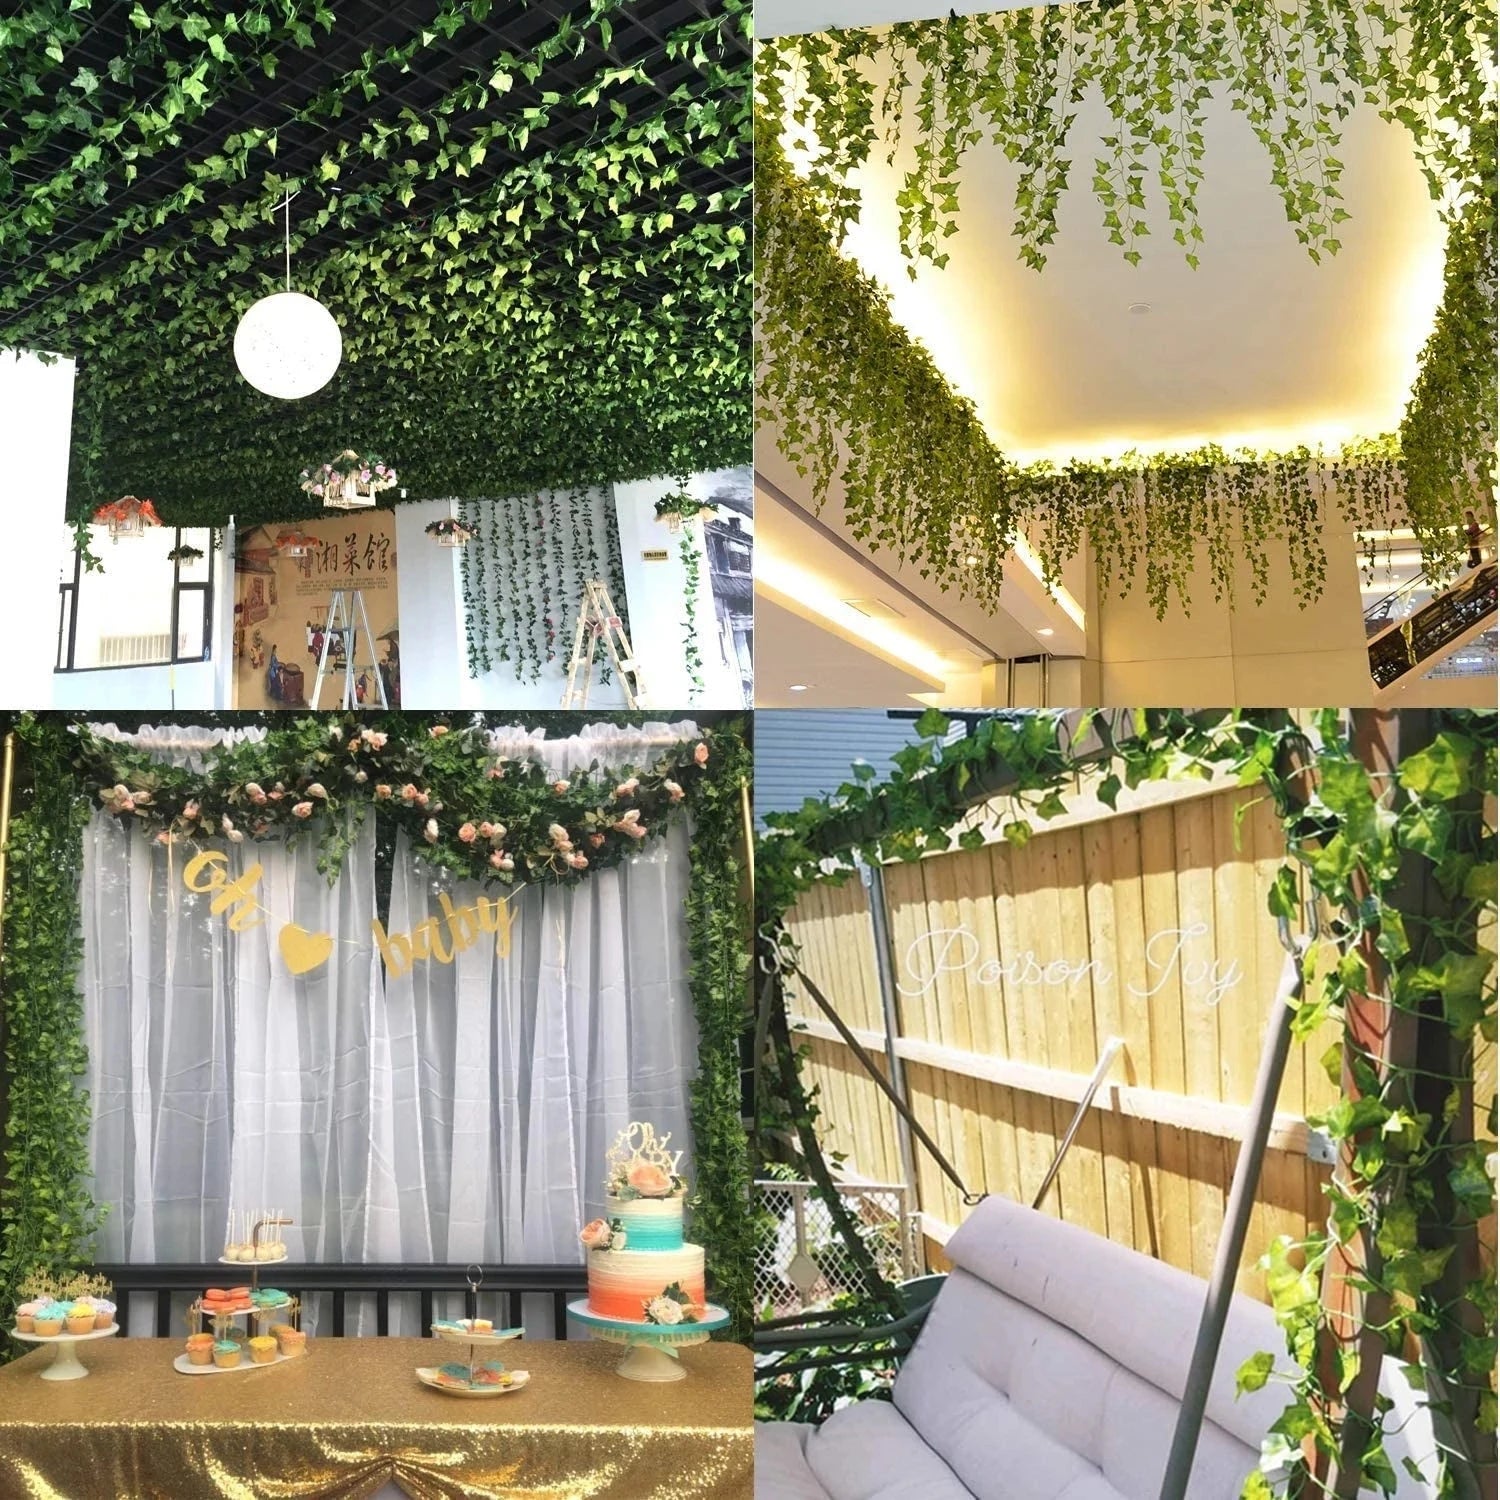 200CM Artificial Plants Creeper Green Silk Ivy Leaf Garland Wall Hanging Vine Rattan Leaves Home Wedding Party Decoration Plants